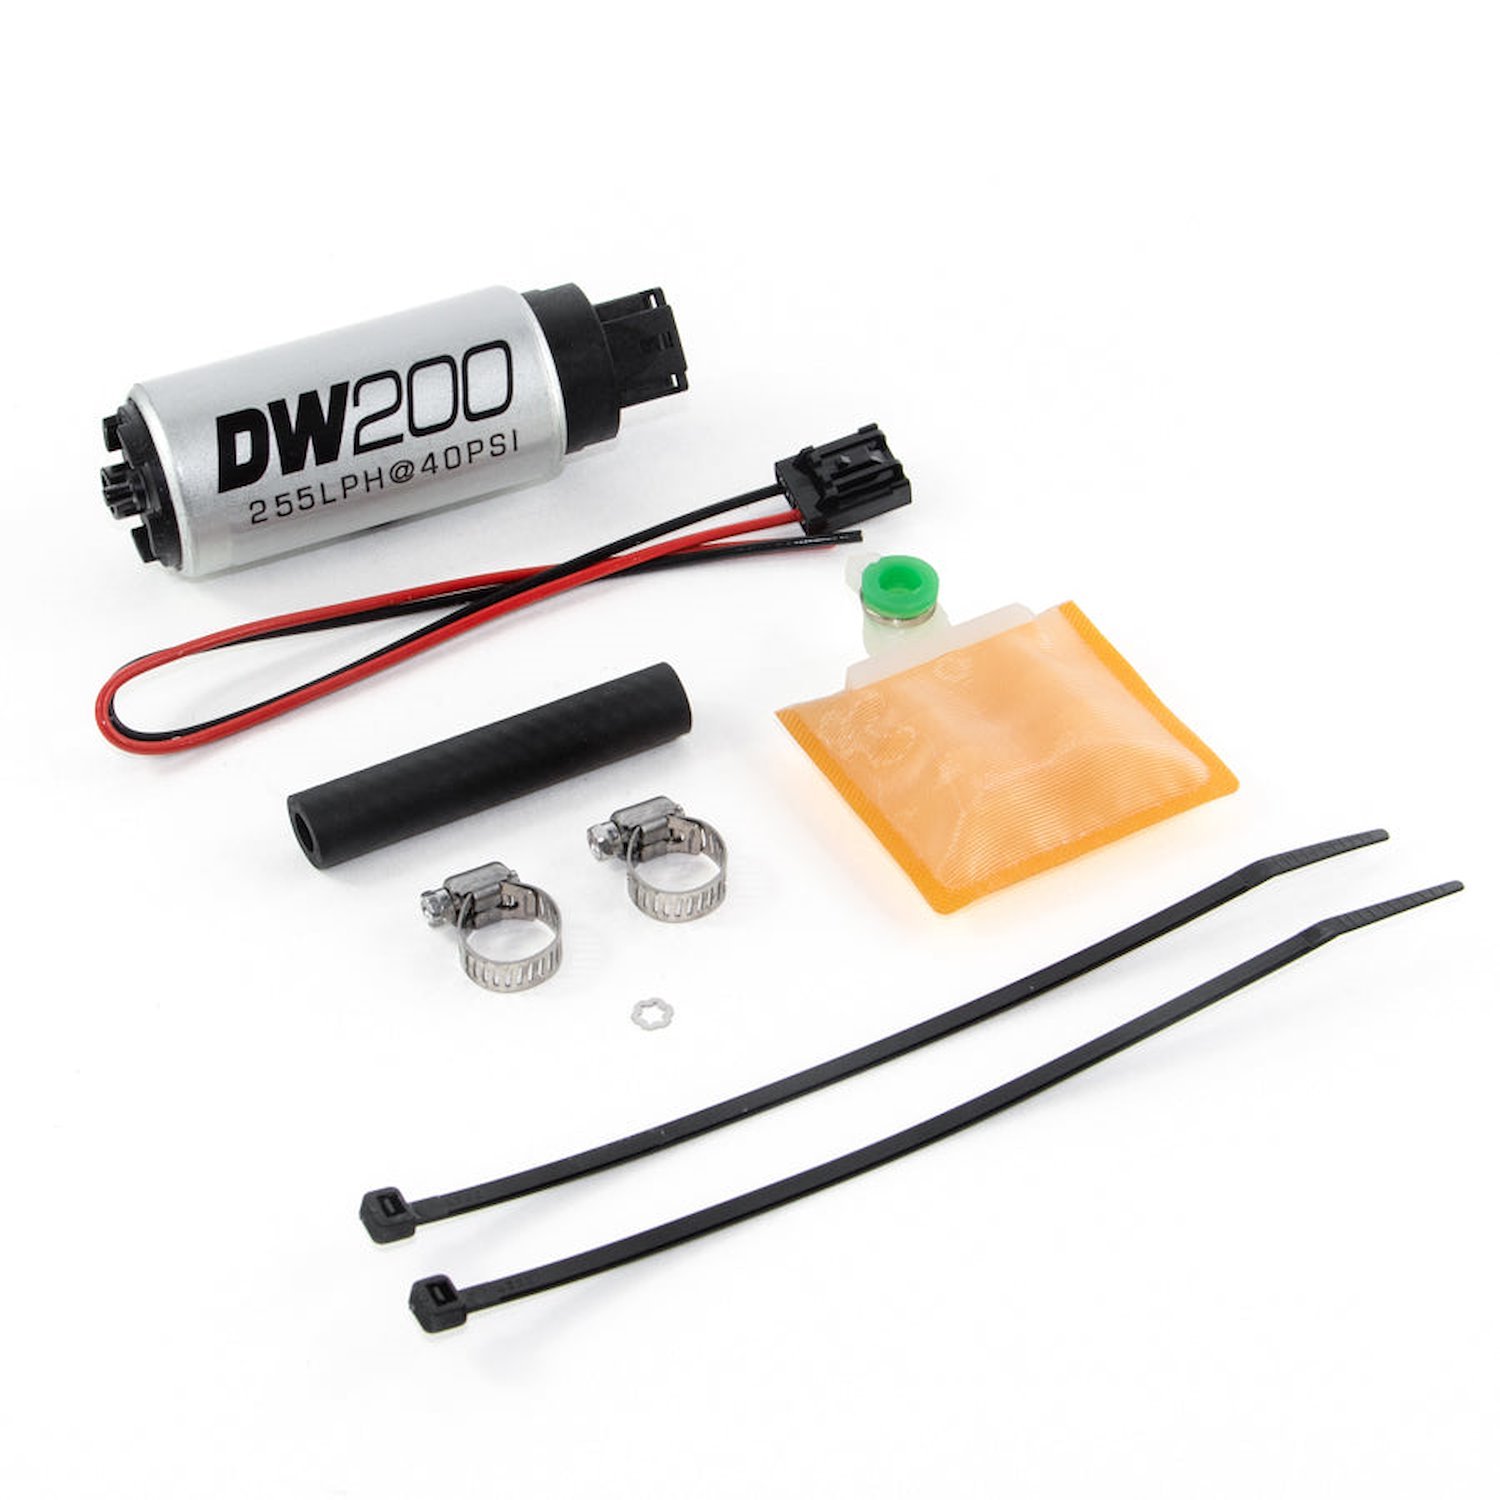 92010883 DW200 series 255lph in-tank fuel pump w/ install kit for Eclipse (all FWD) 90-94